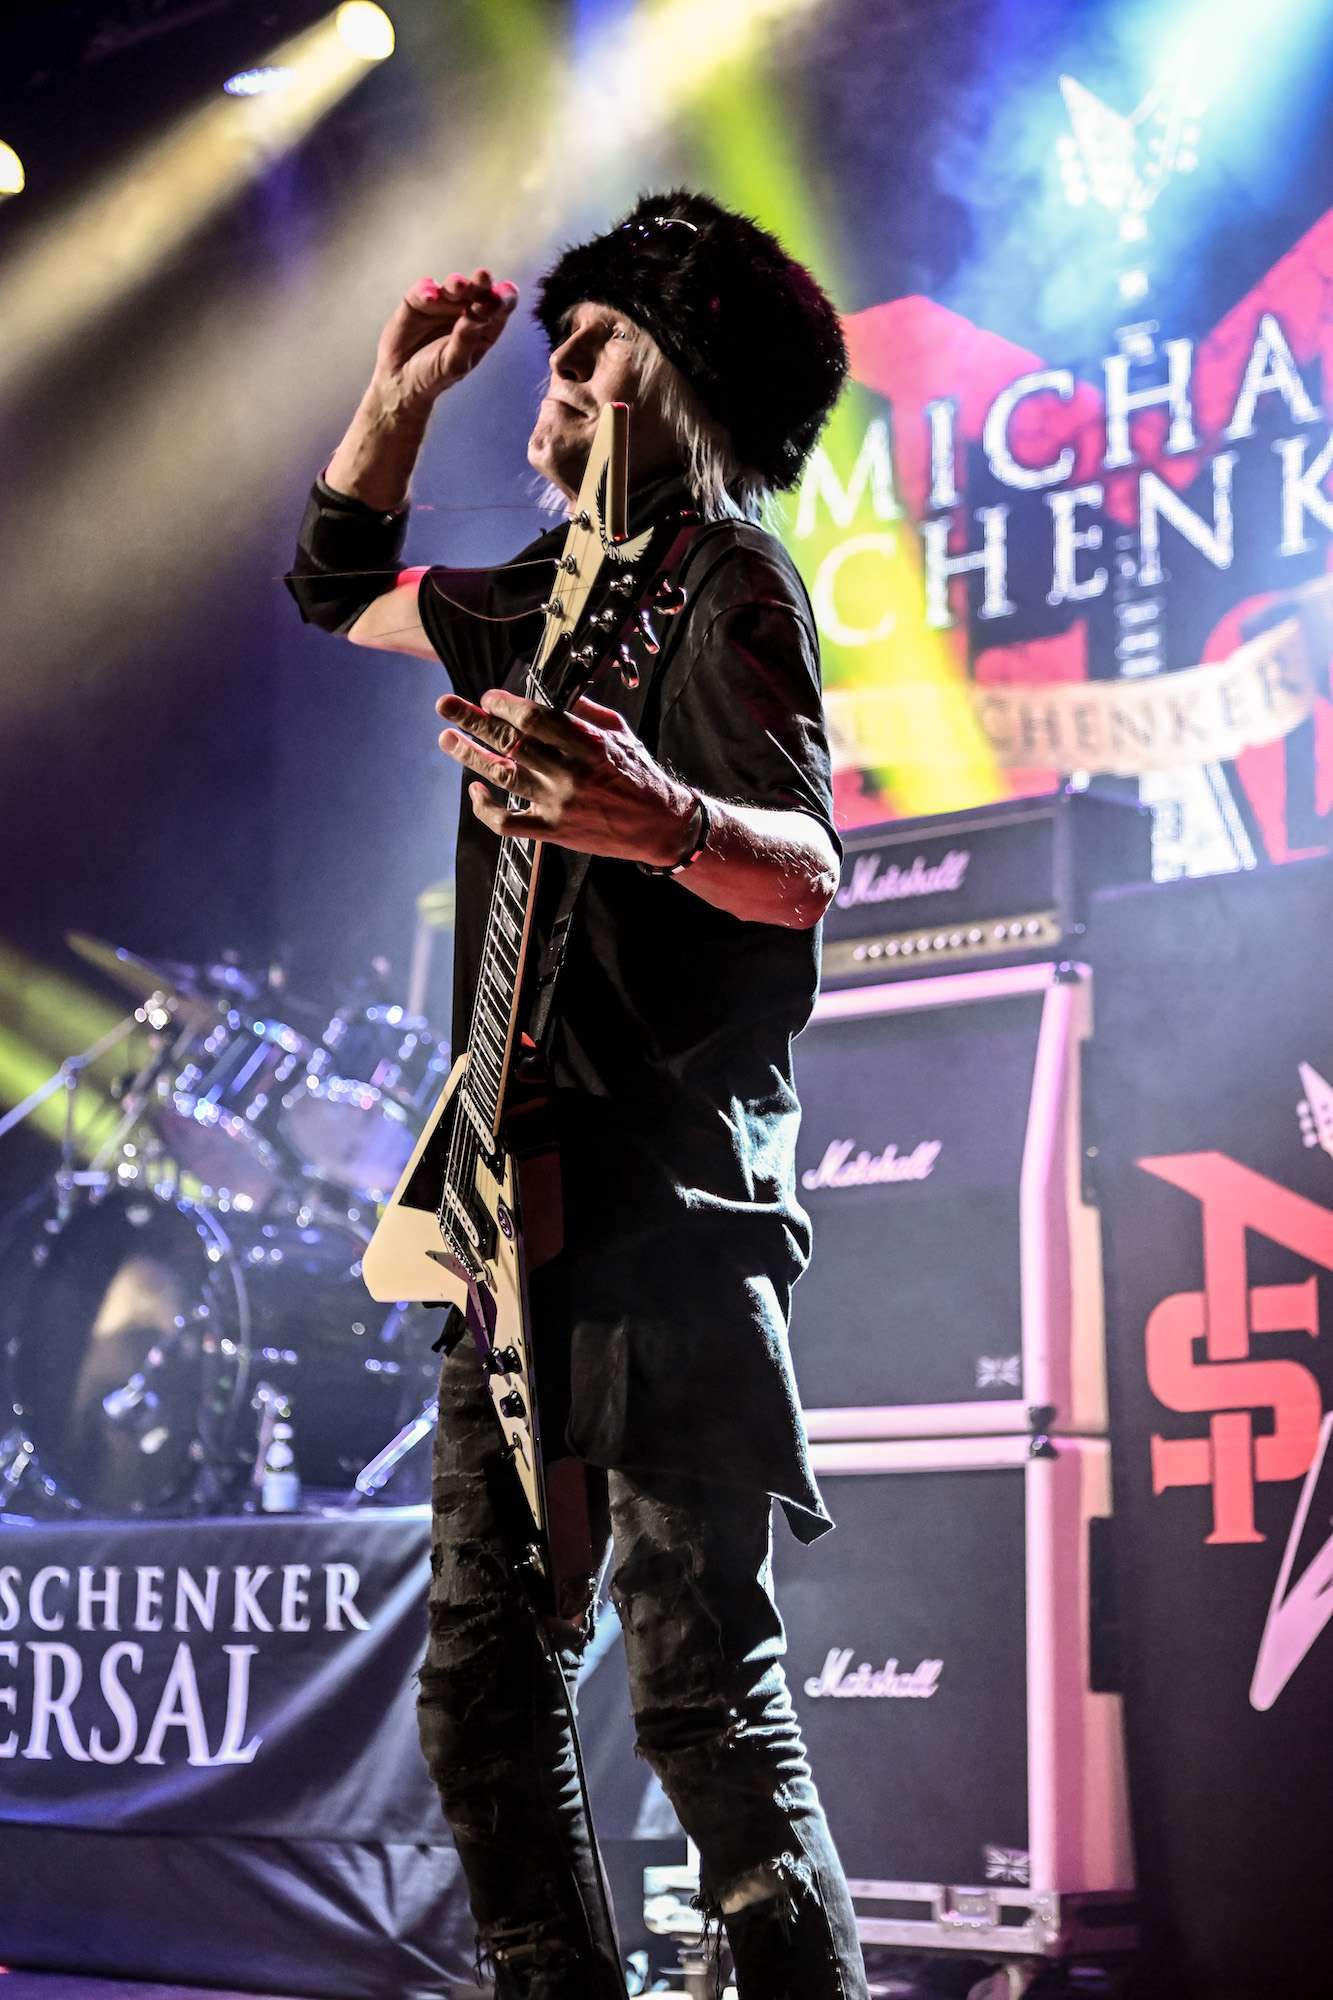 Michael Schenker Live at the Arcada [REVIEW] 1